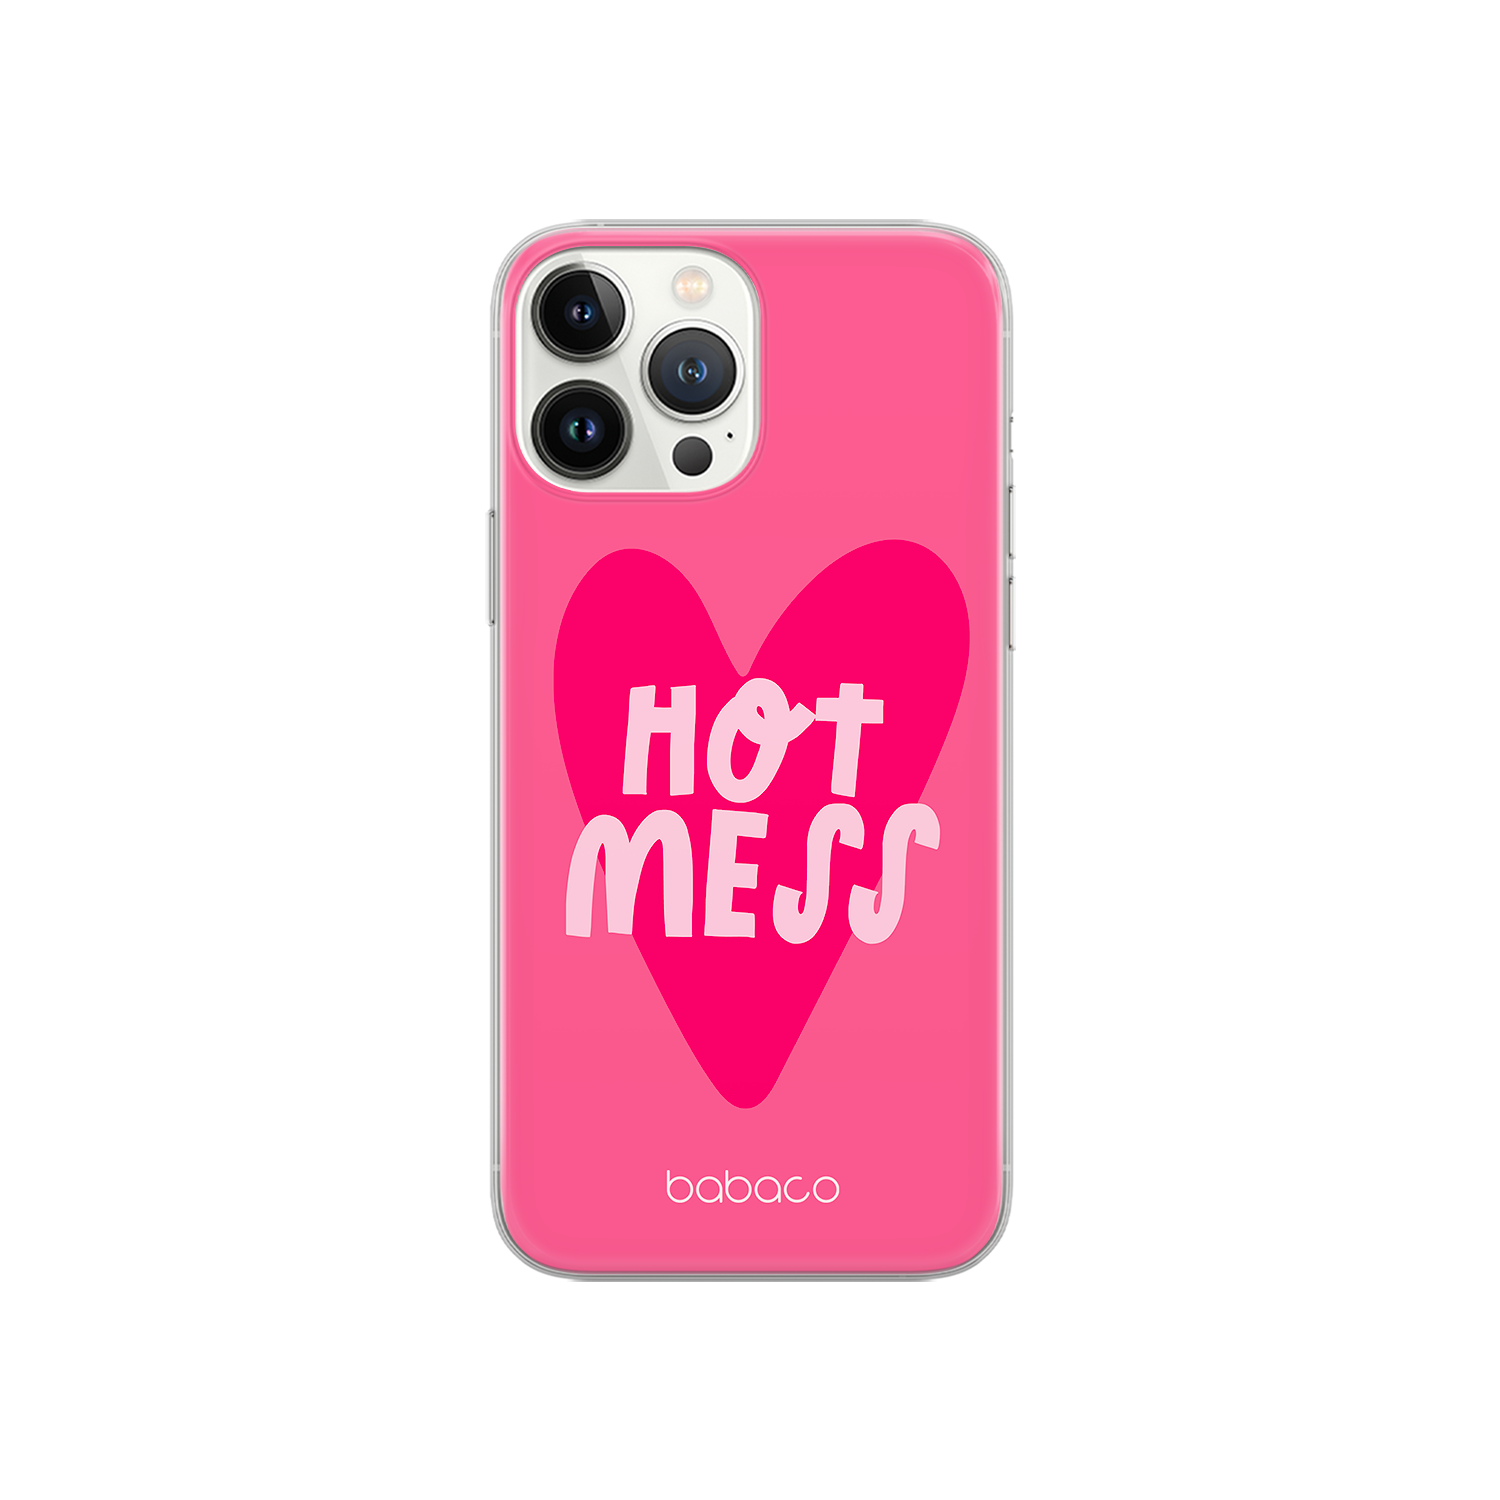 Babaco Case for IPHONE 13 PRO MAX pattern: Hot Mess 001